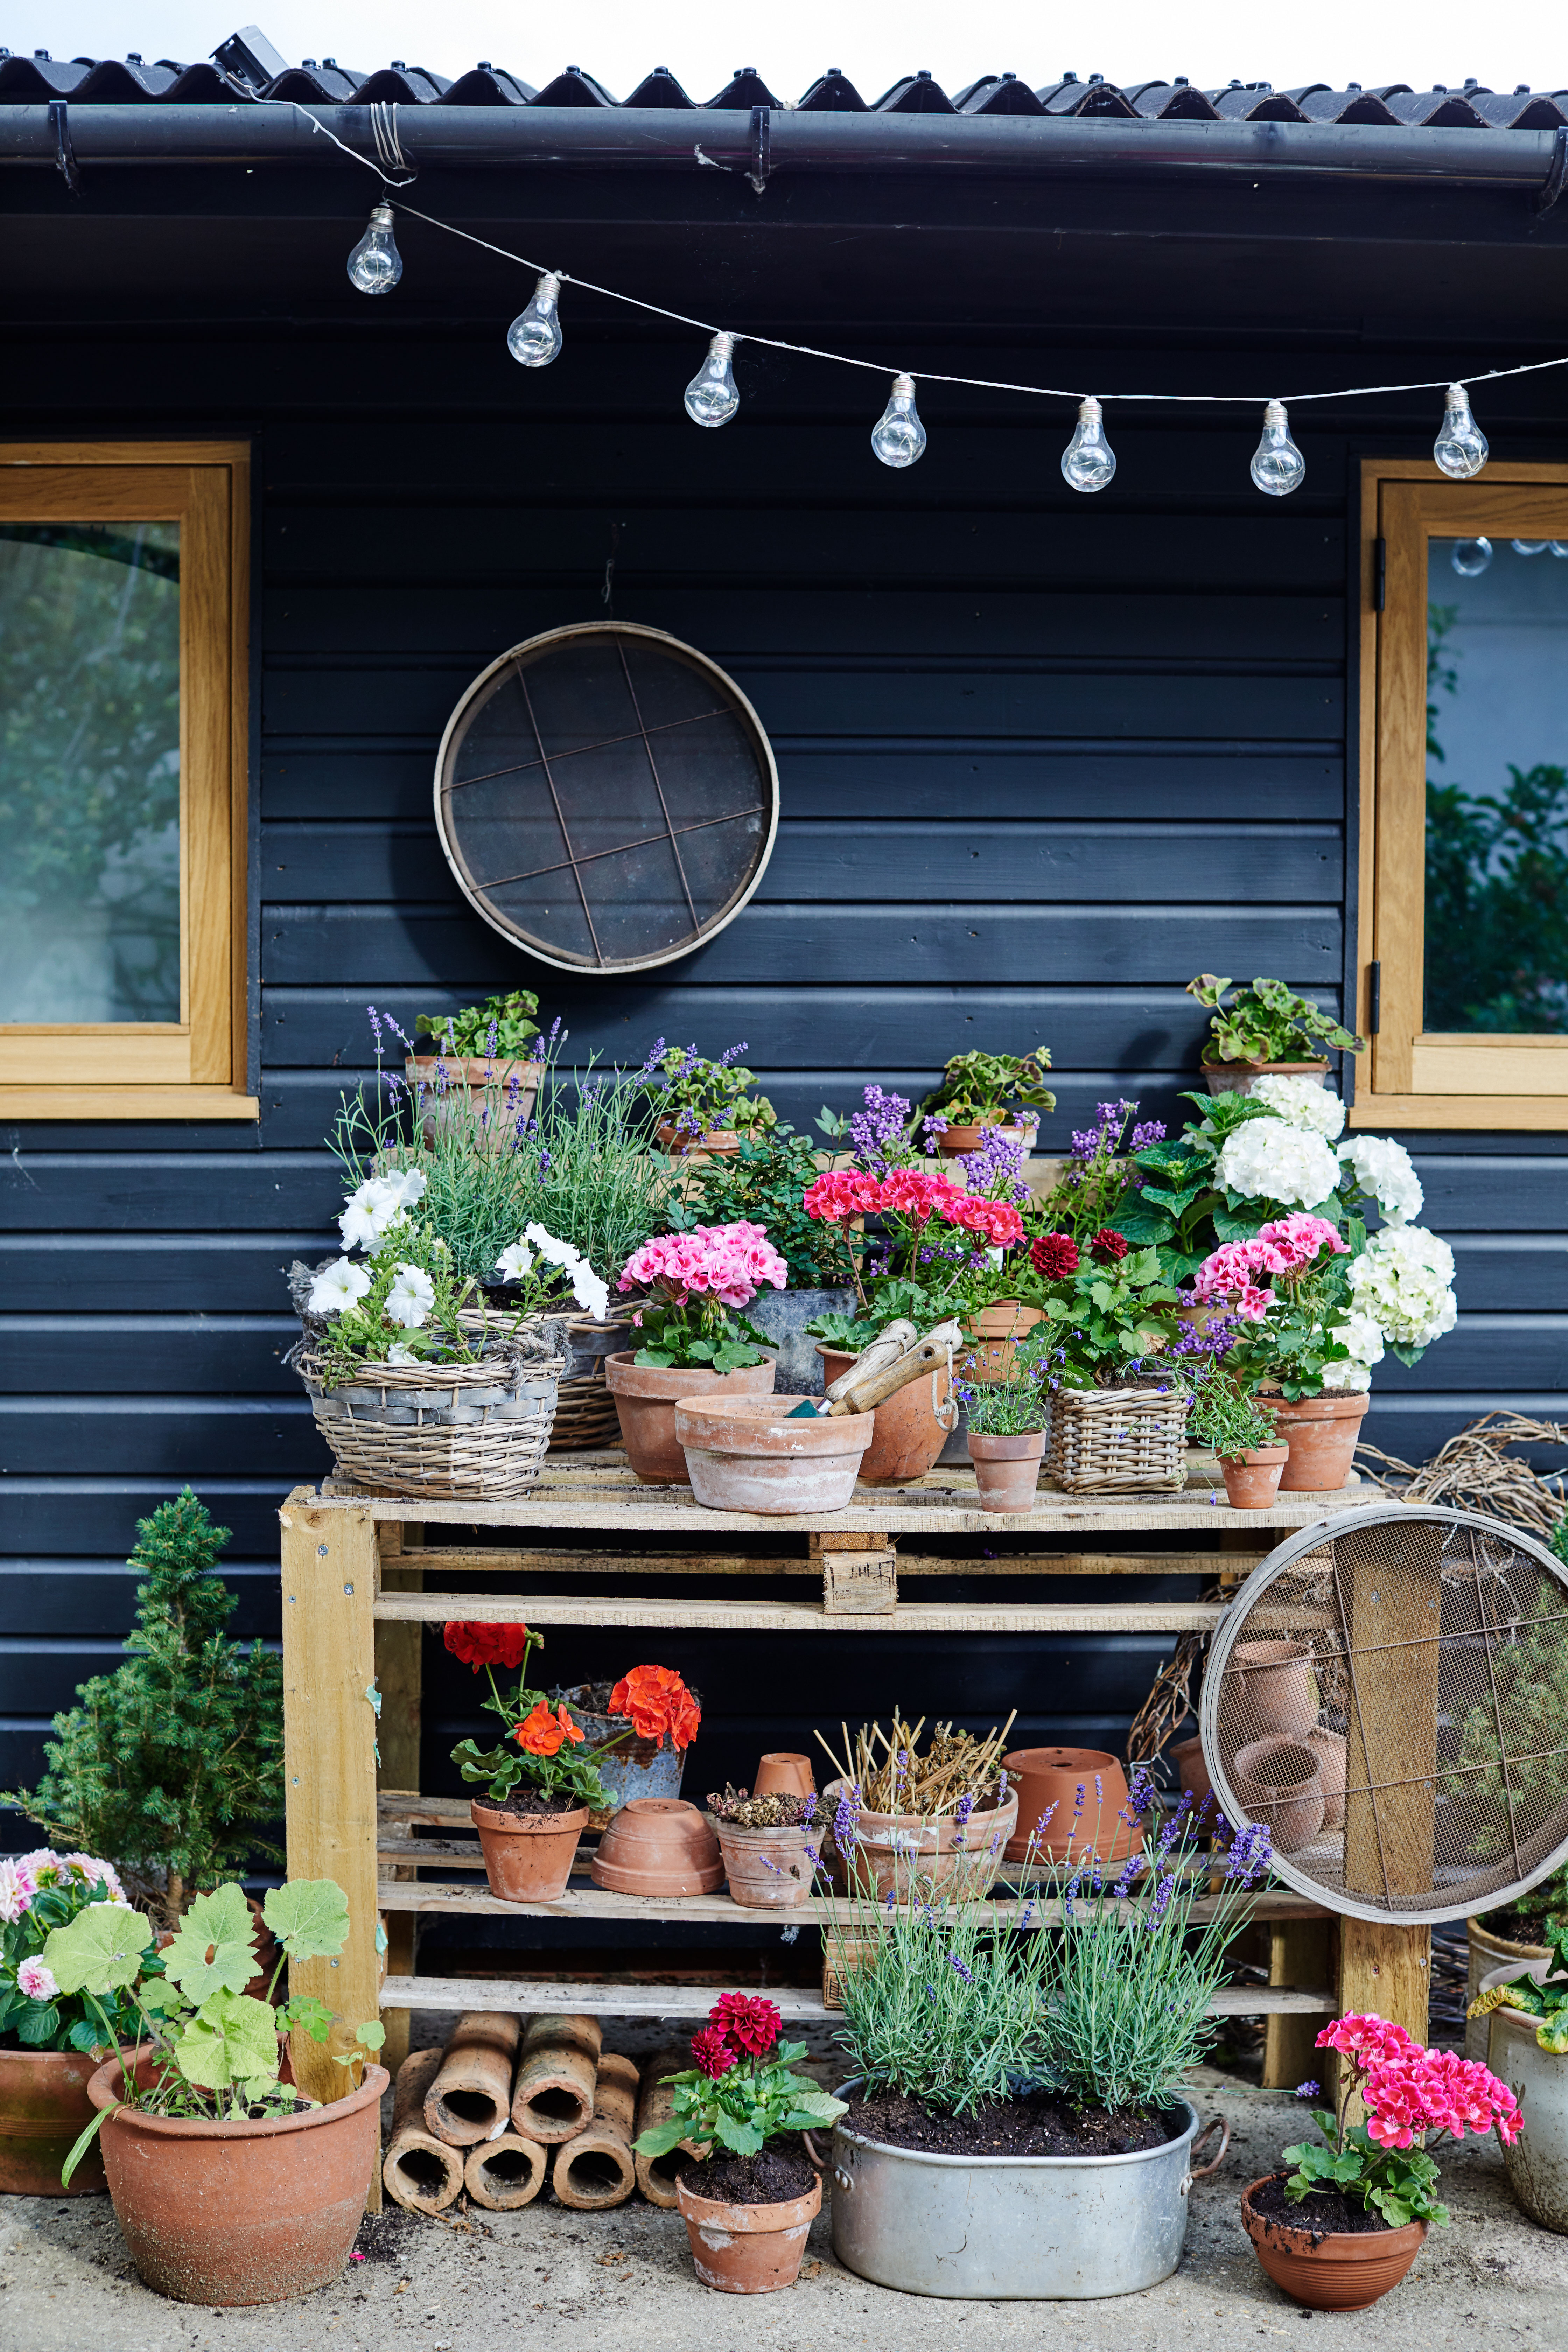 You Can Diy These Garden Pallet Planter Ideas For Free And They Re Gorgeous Real Homes